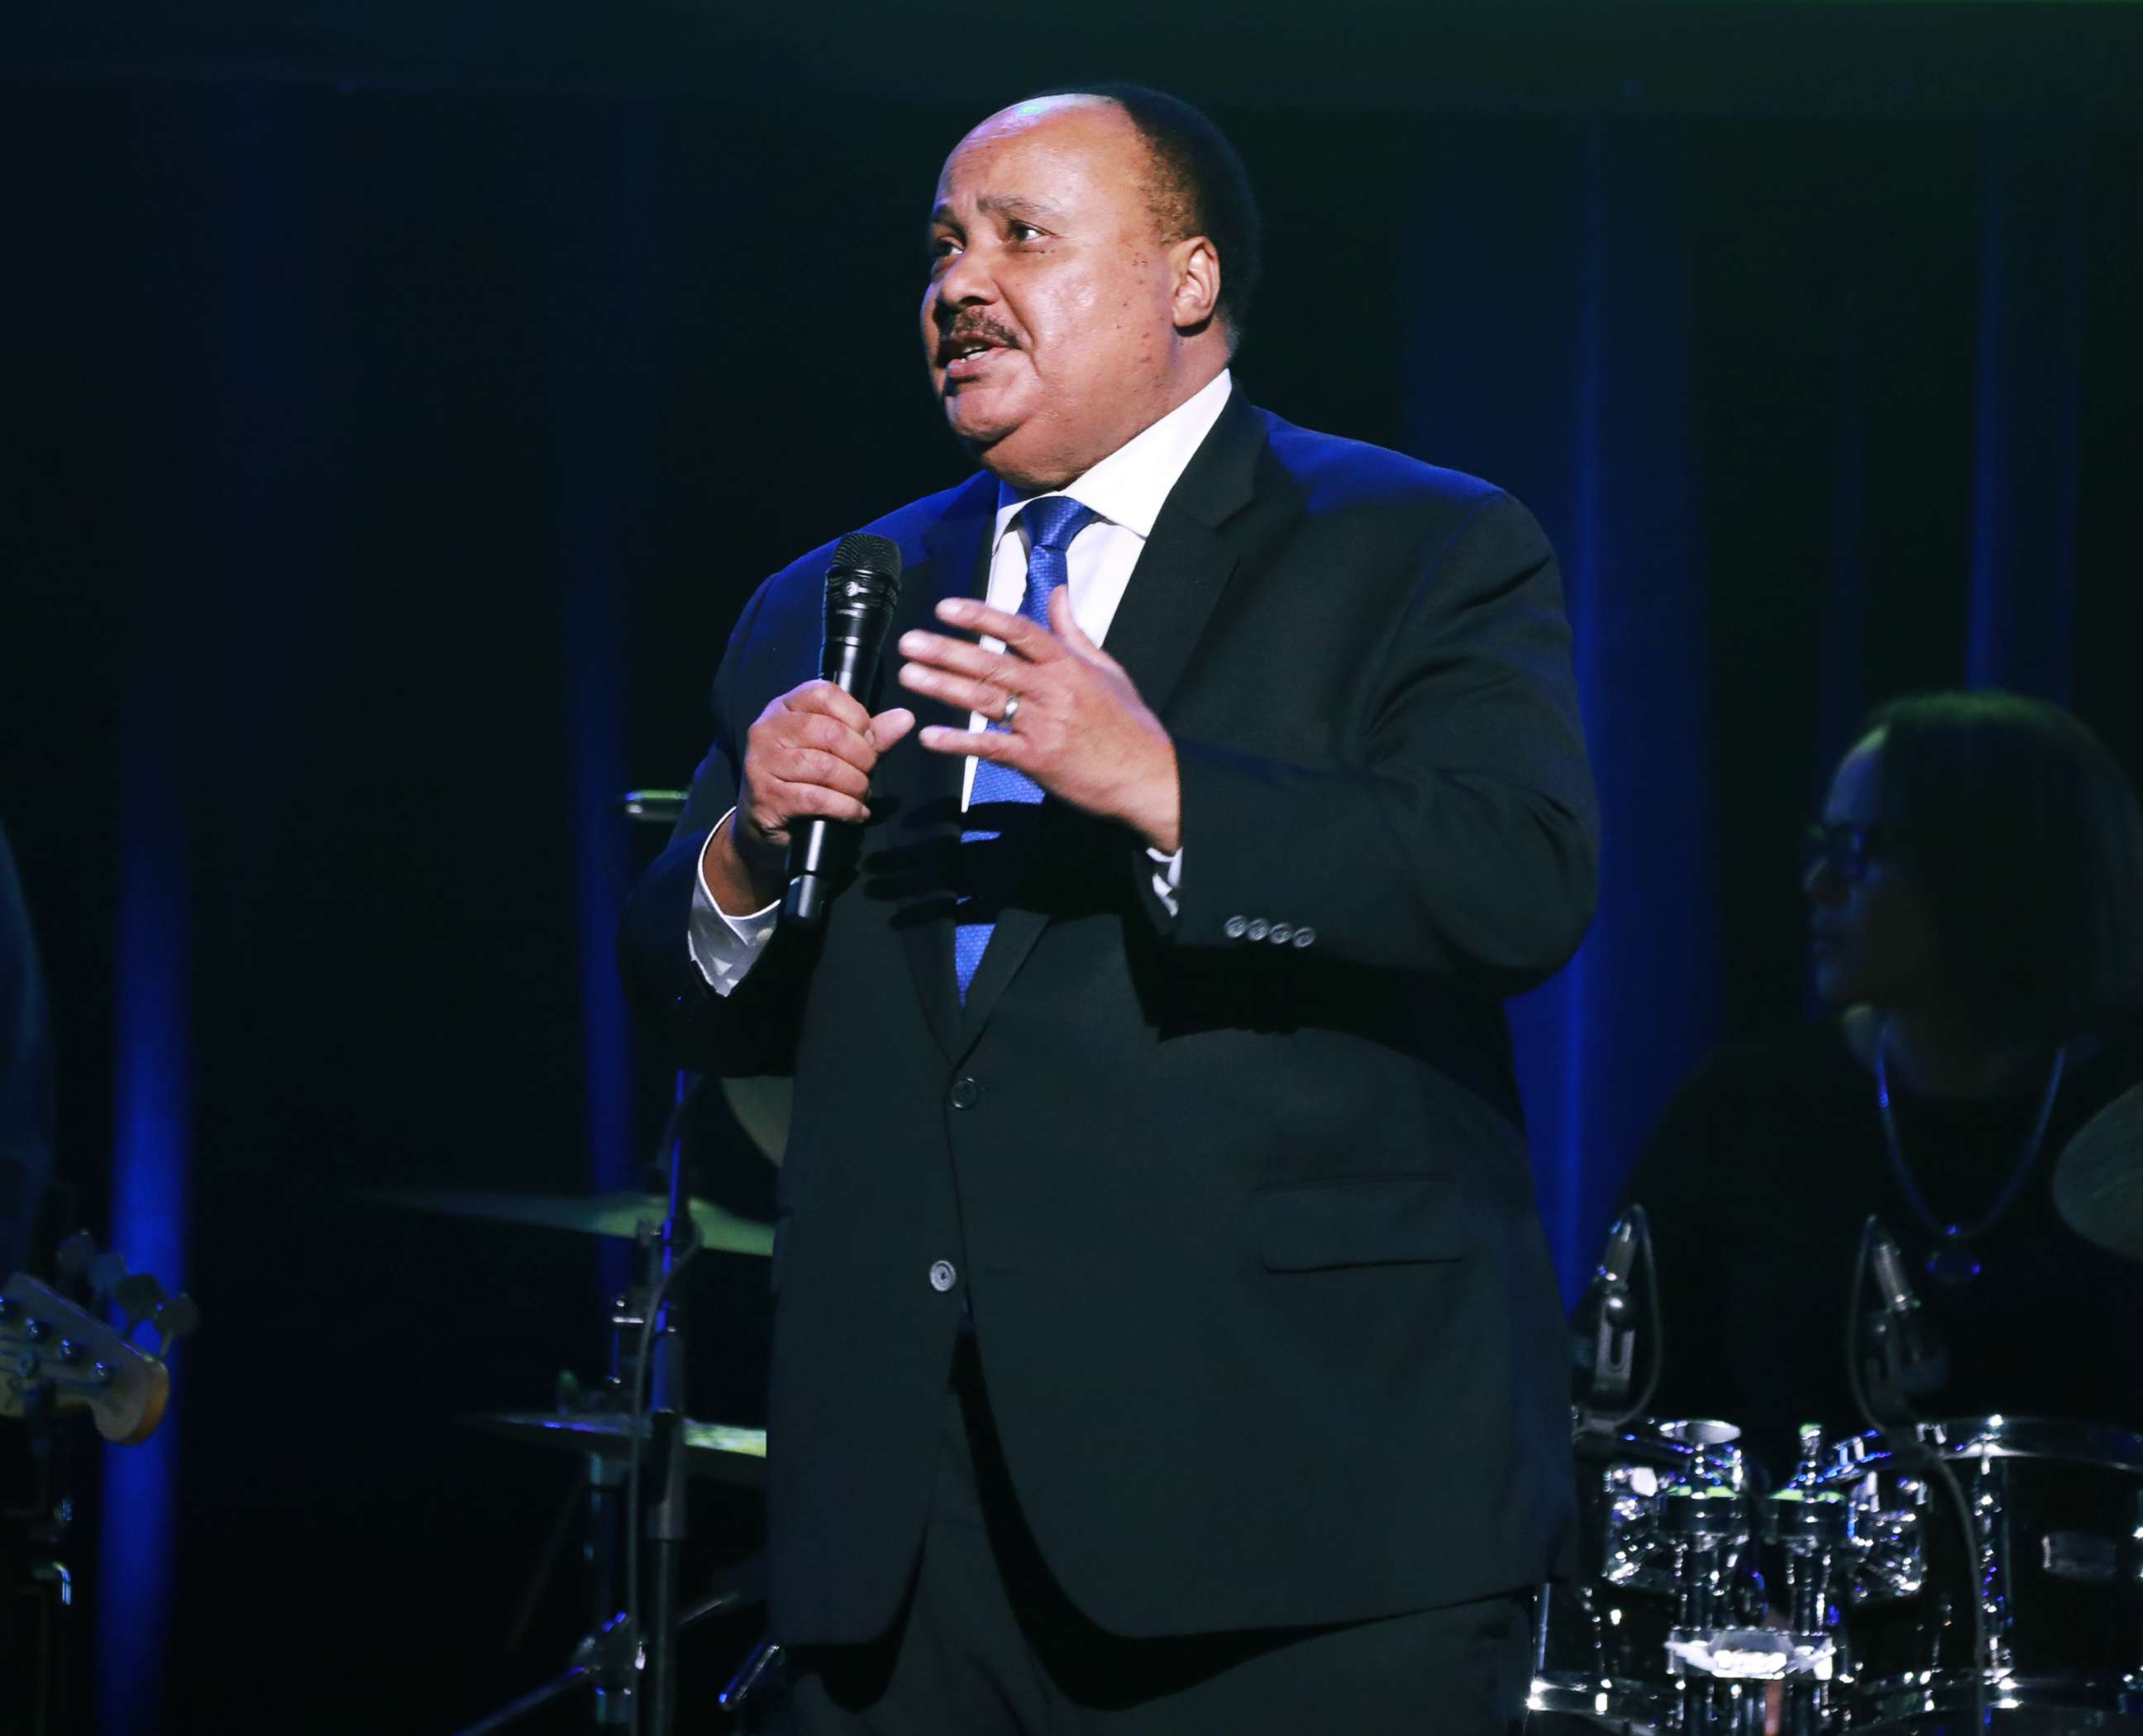 PHOTO: Martin Luther King III speaks onstage during an event at the Town Hall, Feb. 28, 2020 in New York City.